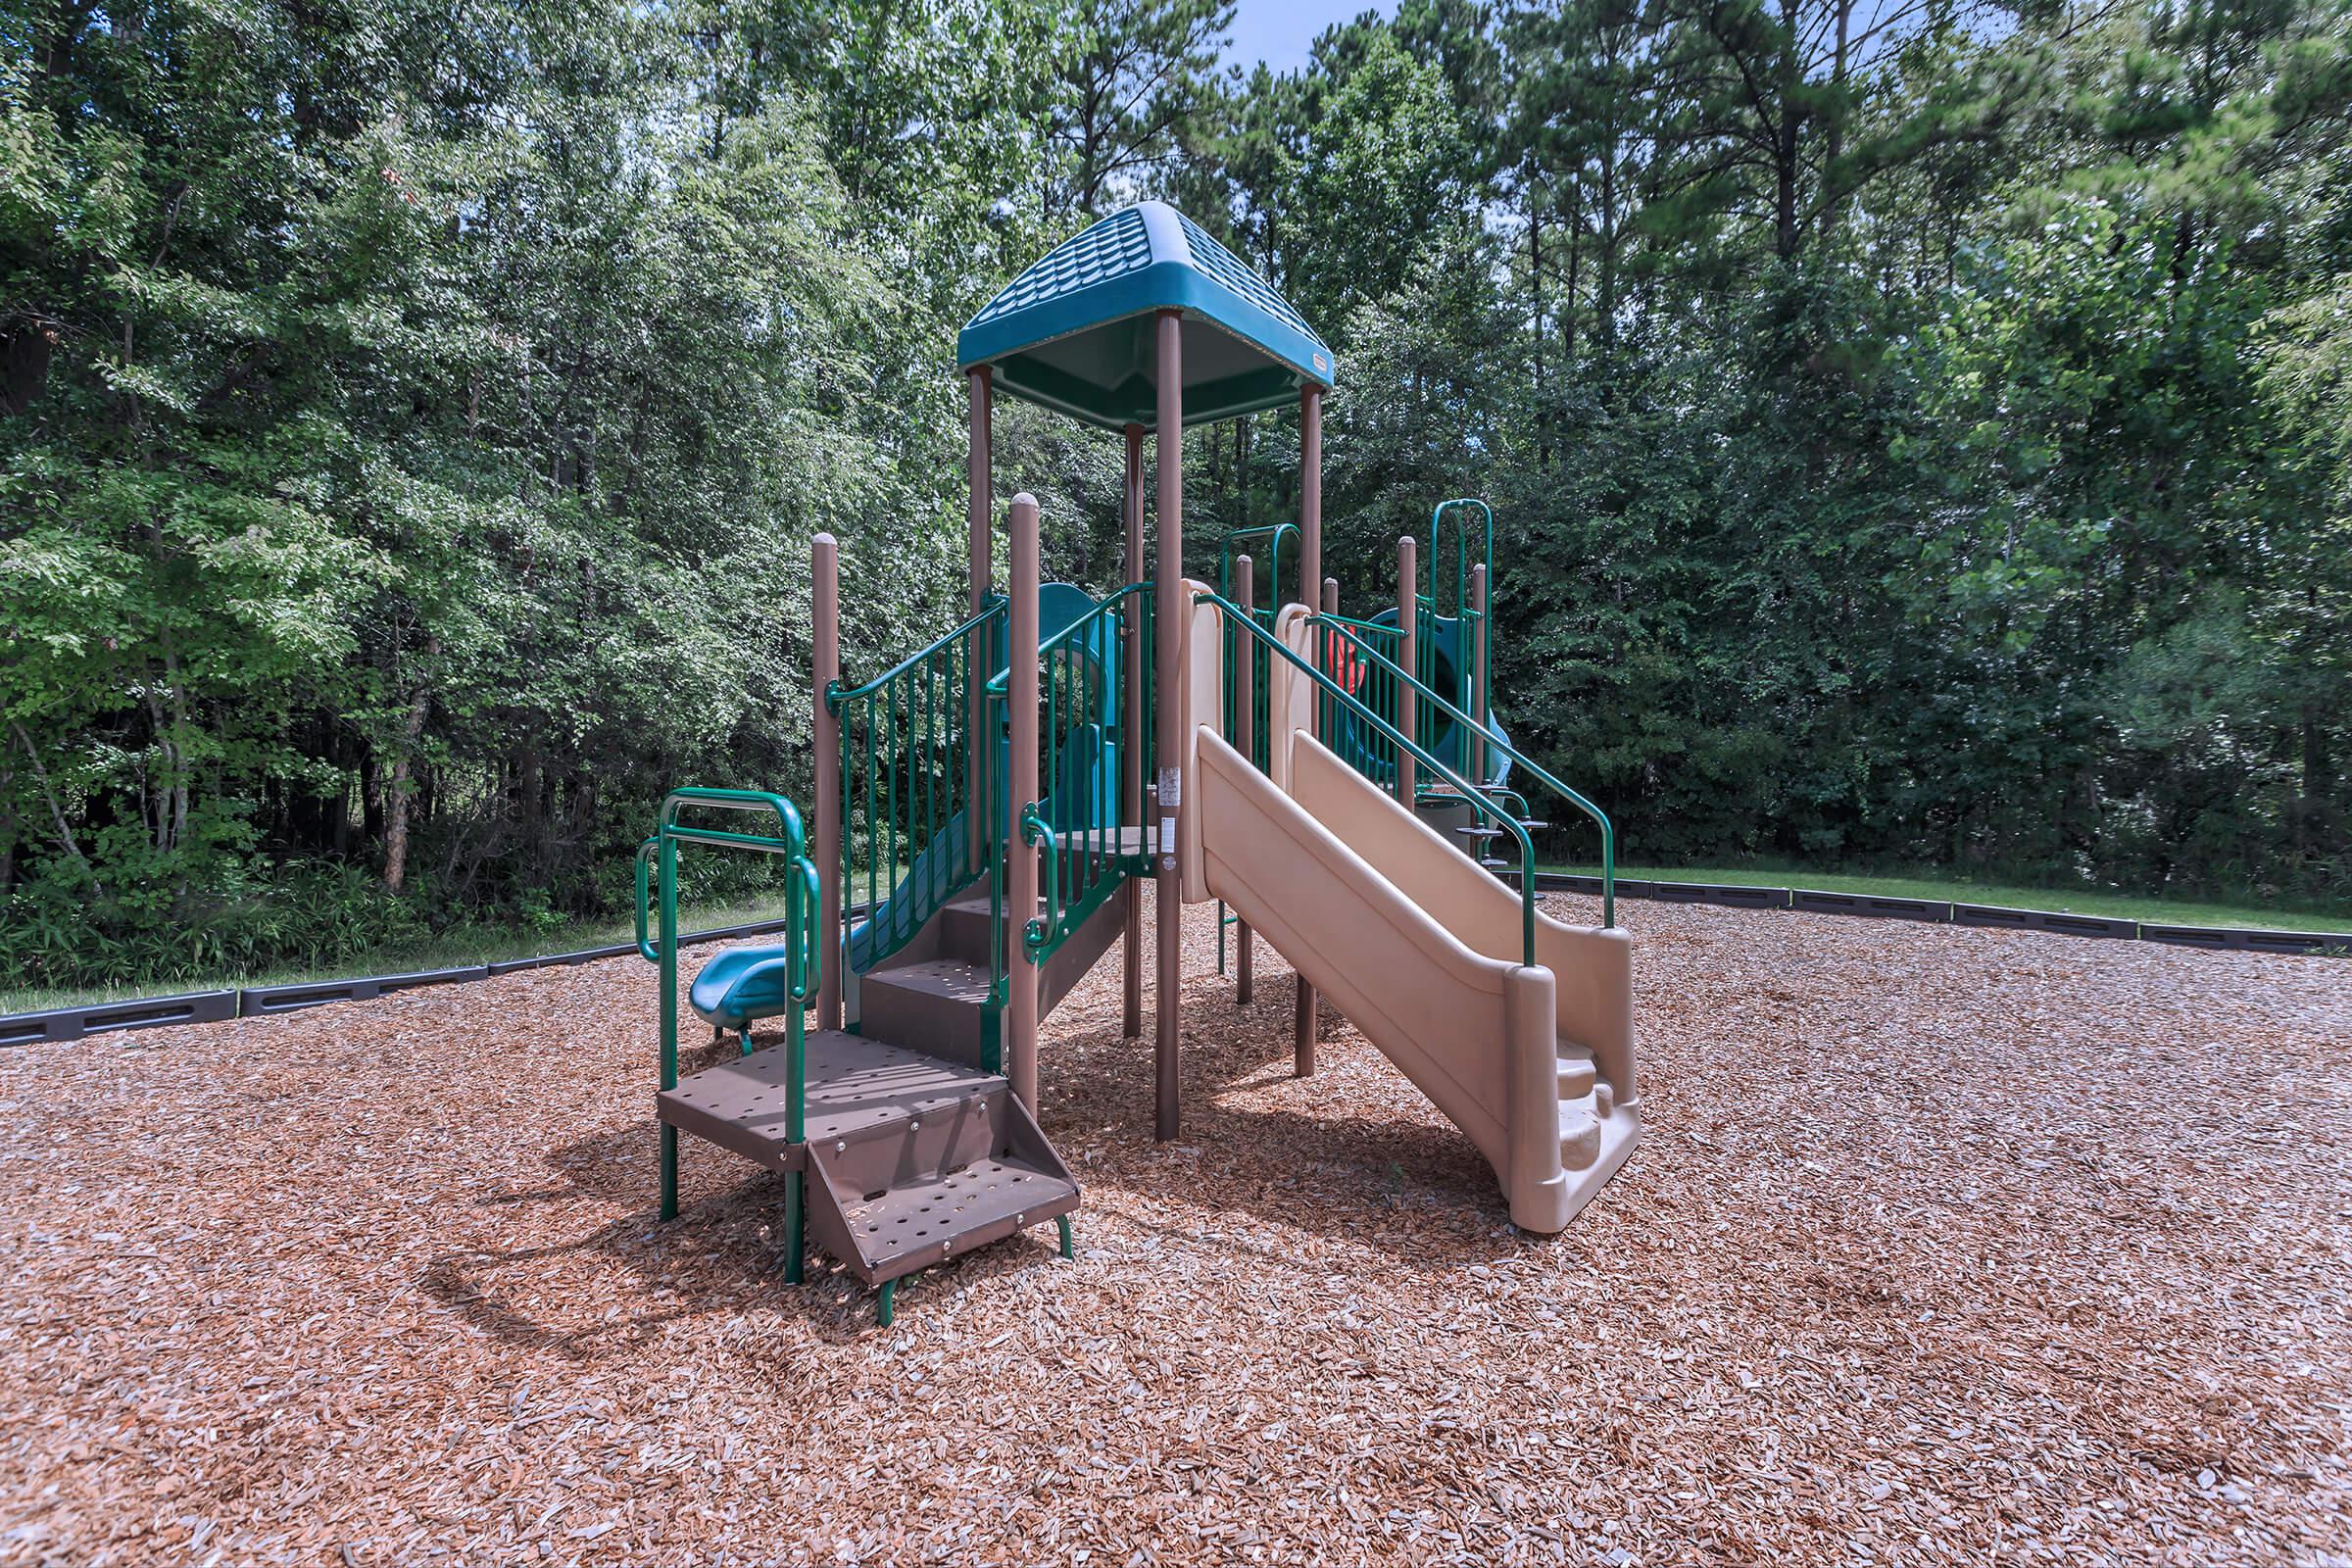 Discover The Play Area Here At Cooper's Ridge in Ladson, South Carolina